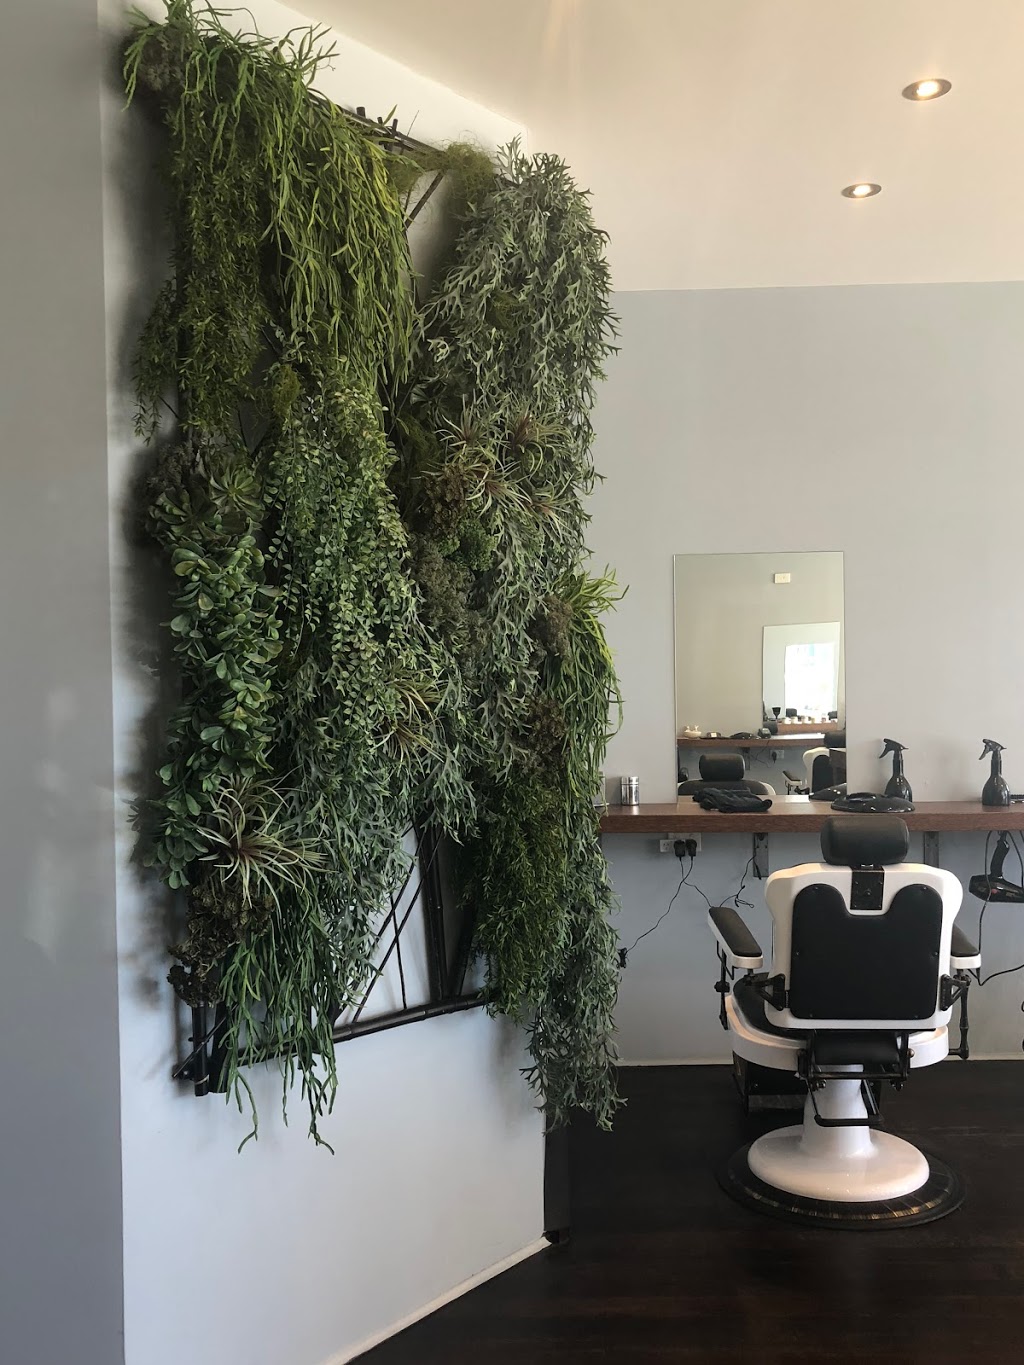 Barberie | hair care | 1/272 Clovelly Rd, Coogee NSW 2034, Australia | 0296647400 OR +61 2 9664 7400